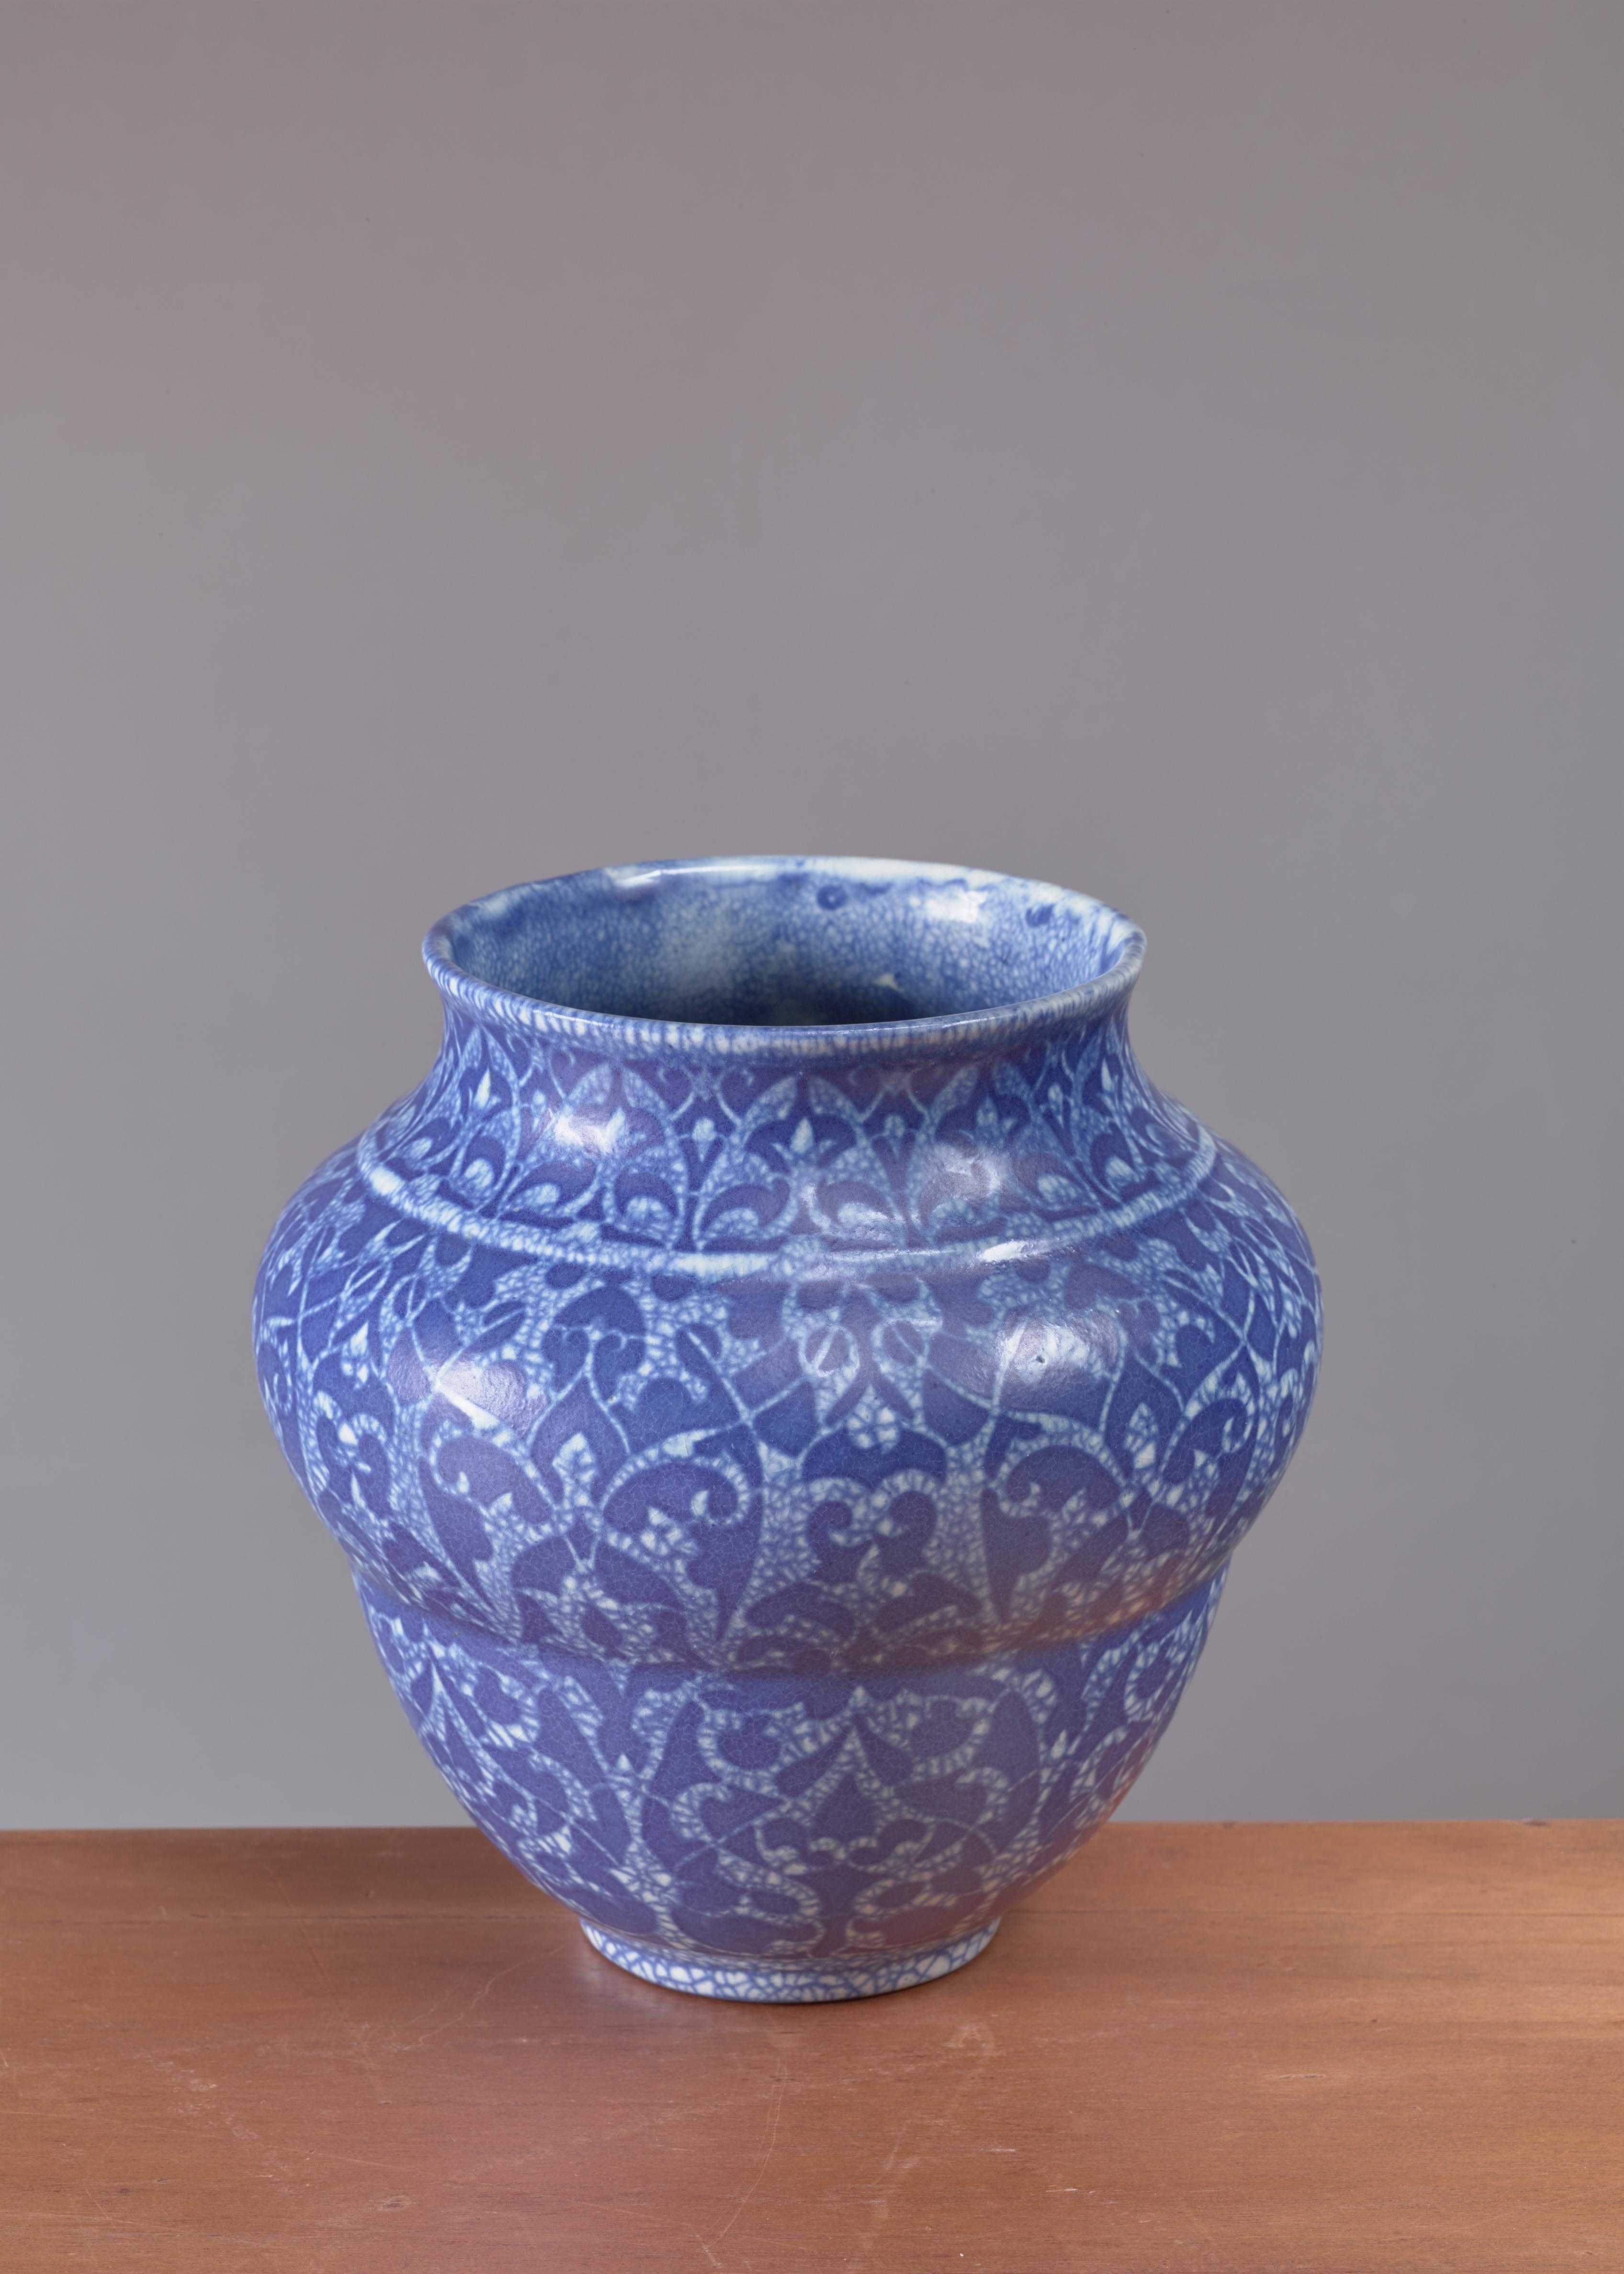 An Art Deco crackle glaze vase with a blue pattern by Velten Vordamm, Germany, 1920s.

Marked: “Vordamm” and additional text (possibly “A/14”).
